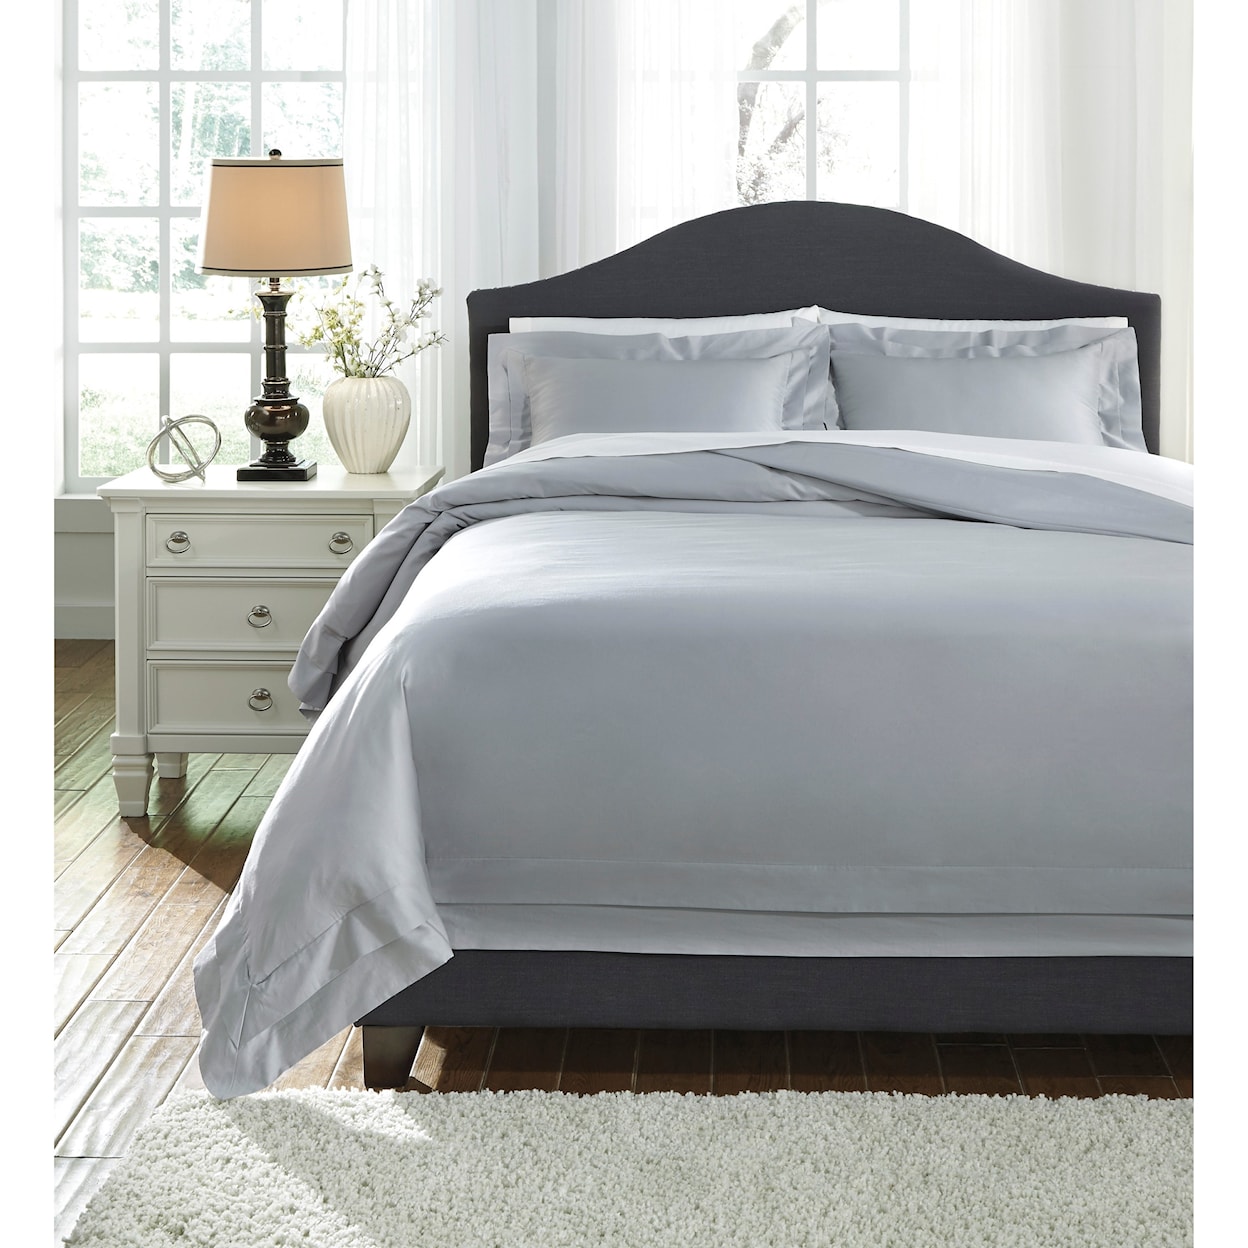 Signature Design by Ashley Furniture Bedding Sets King Chamness Gray Duvet Cover Set